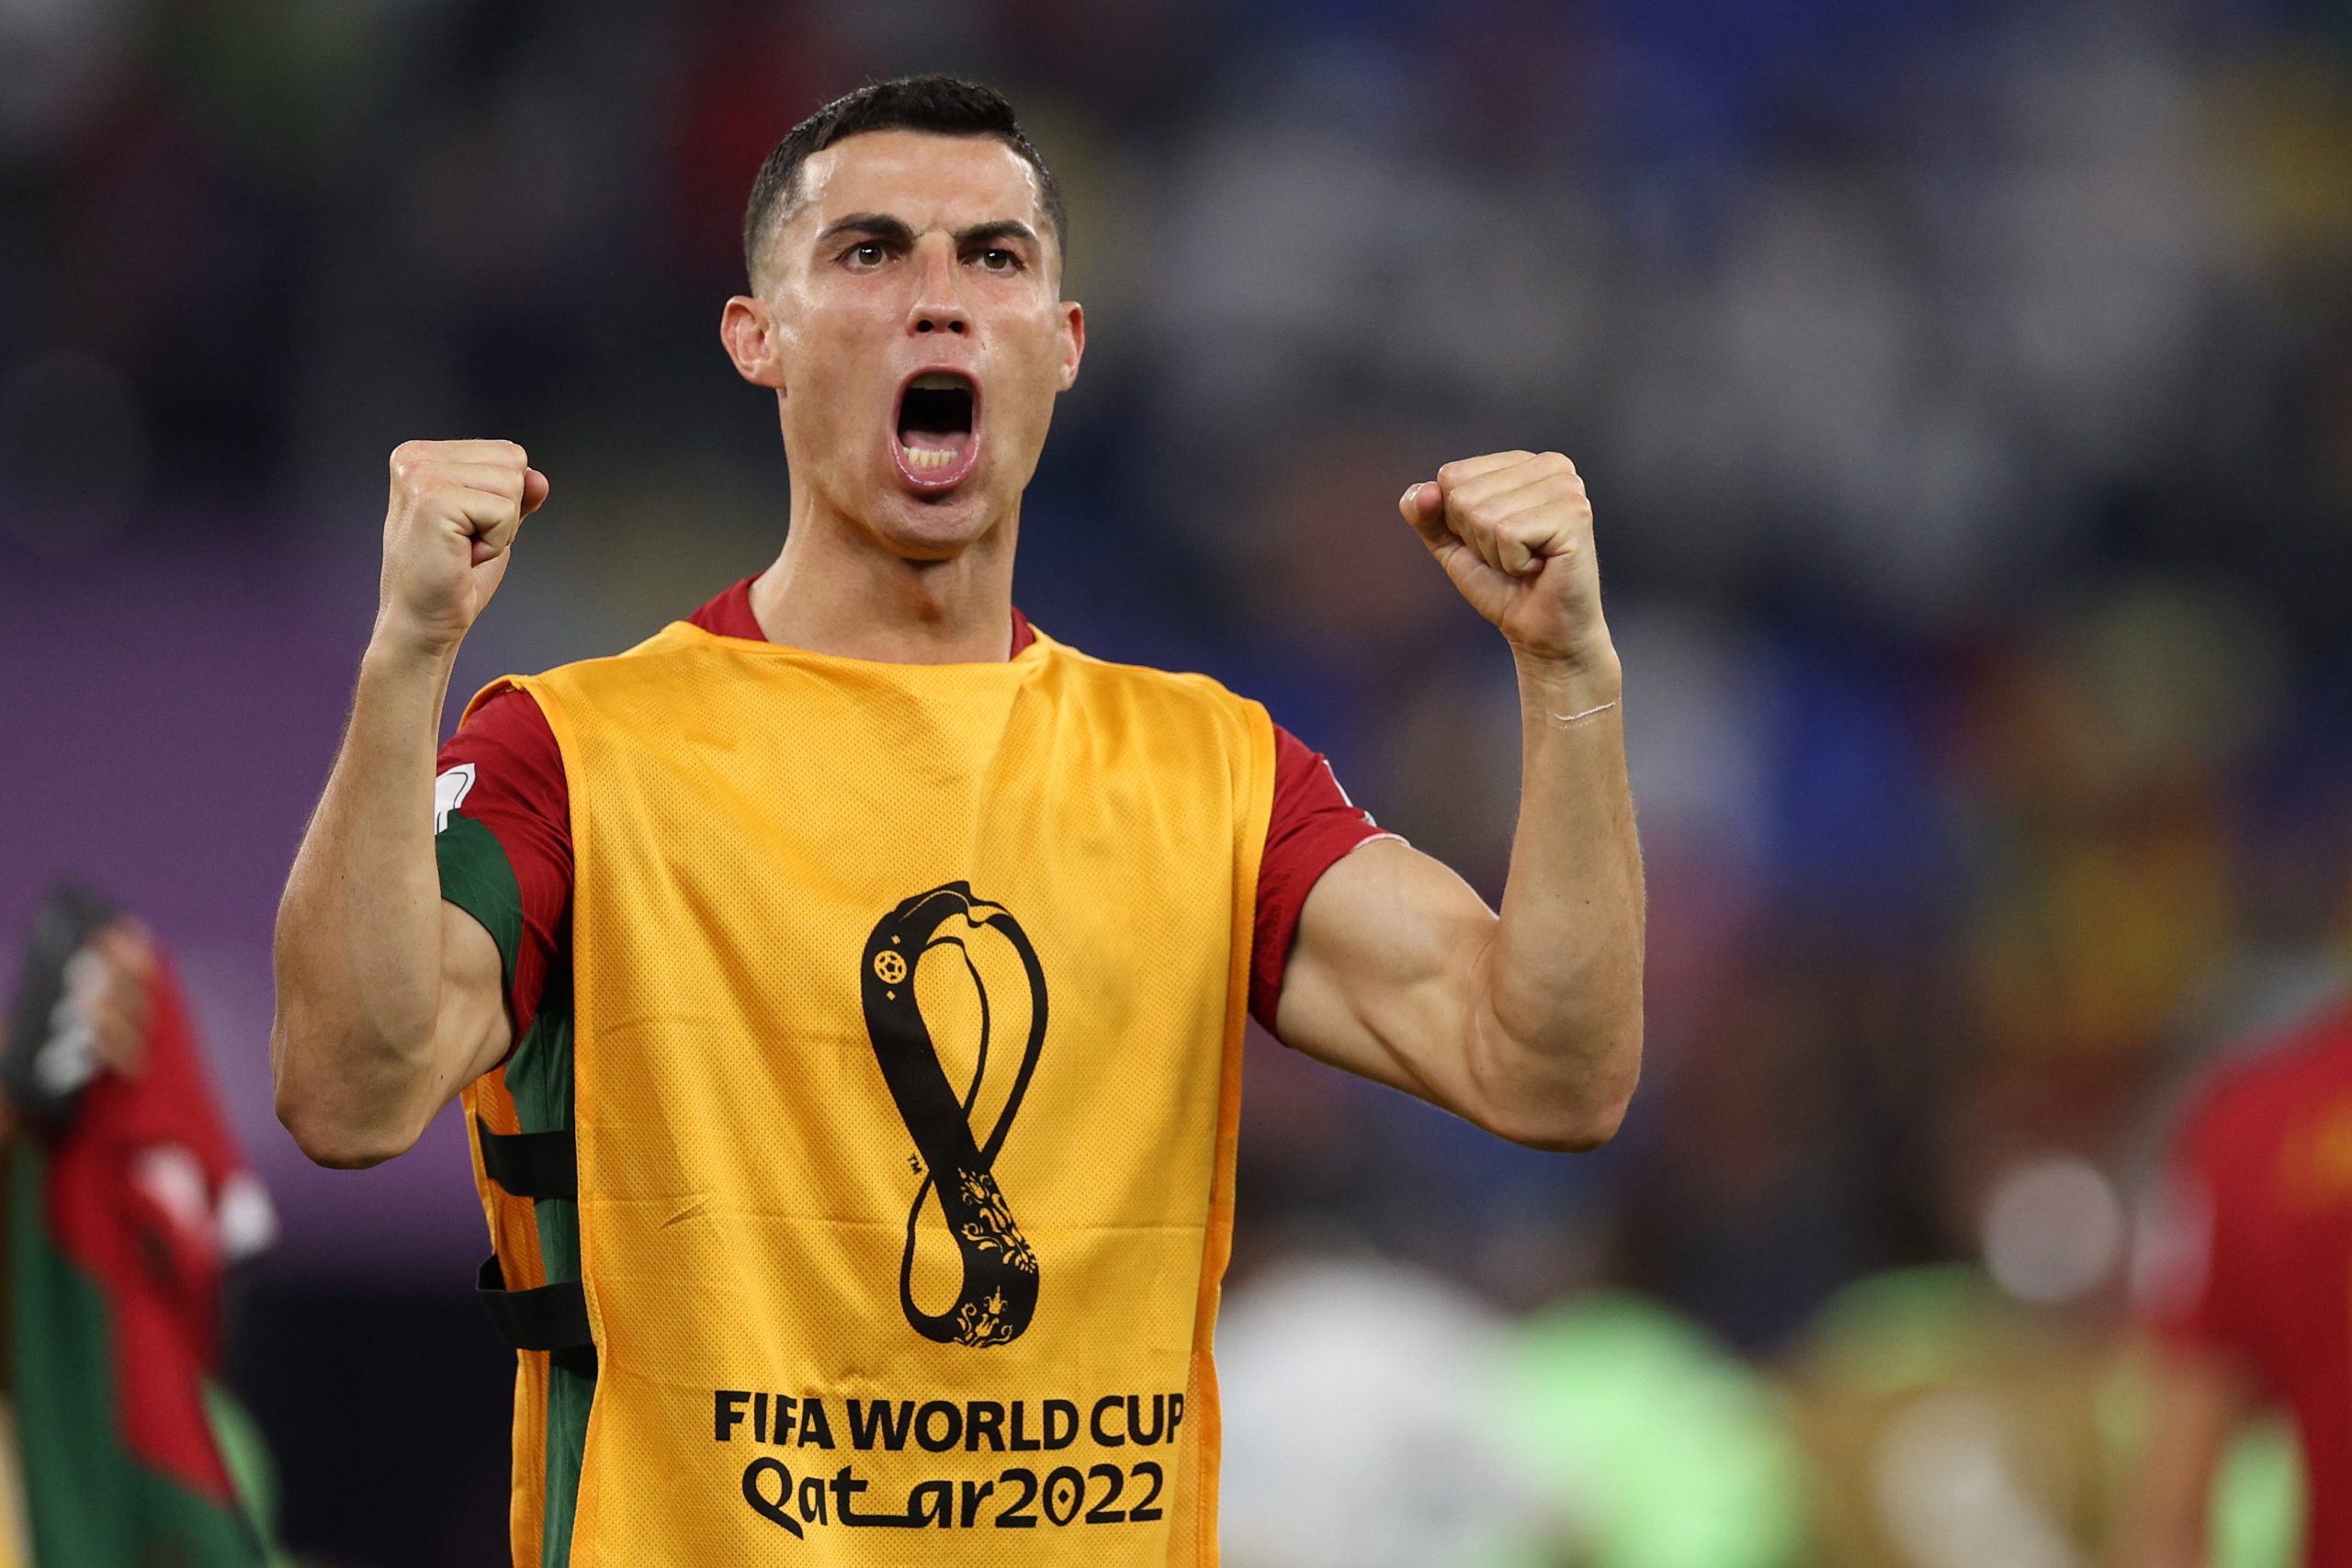 Cristiano Ronaldo of Portugal celebrates in front of the spectators after the final whistle during the FIFA World Cup Qatar 2022 Group H match between Portugal and Ghana at Stadium 974 on November 24, 2022 in Doha, Qatar